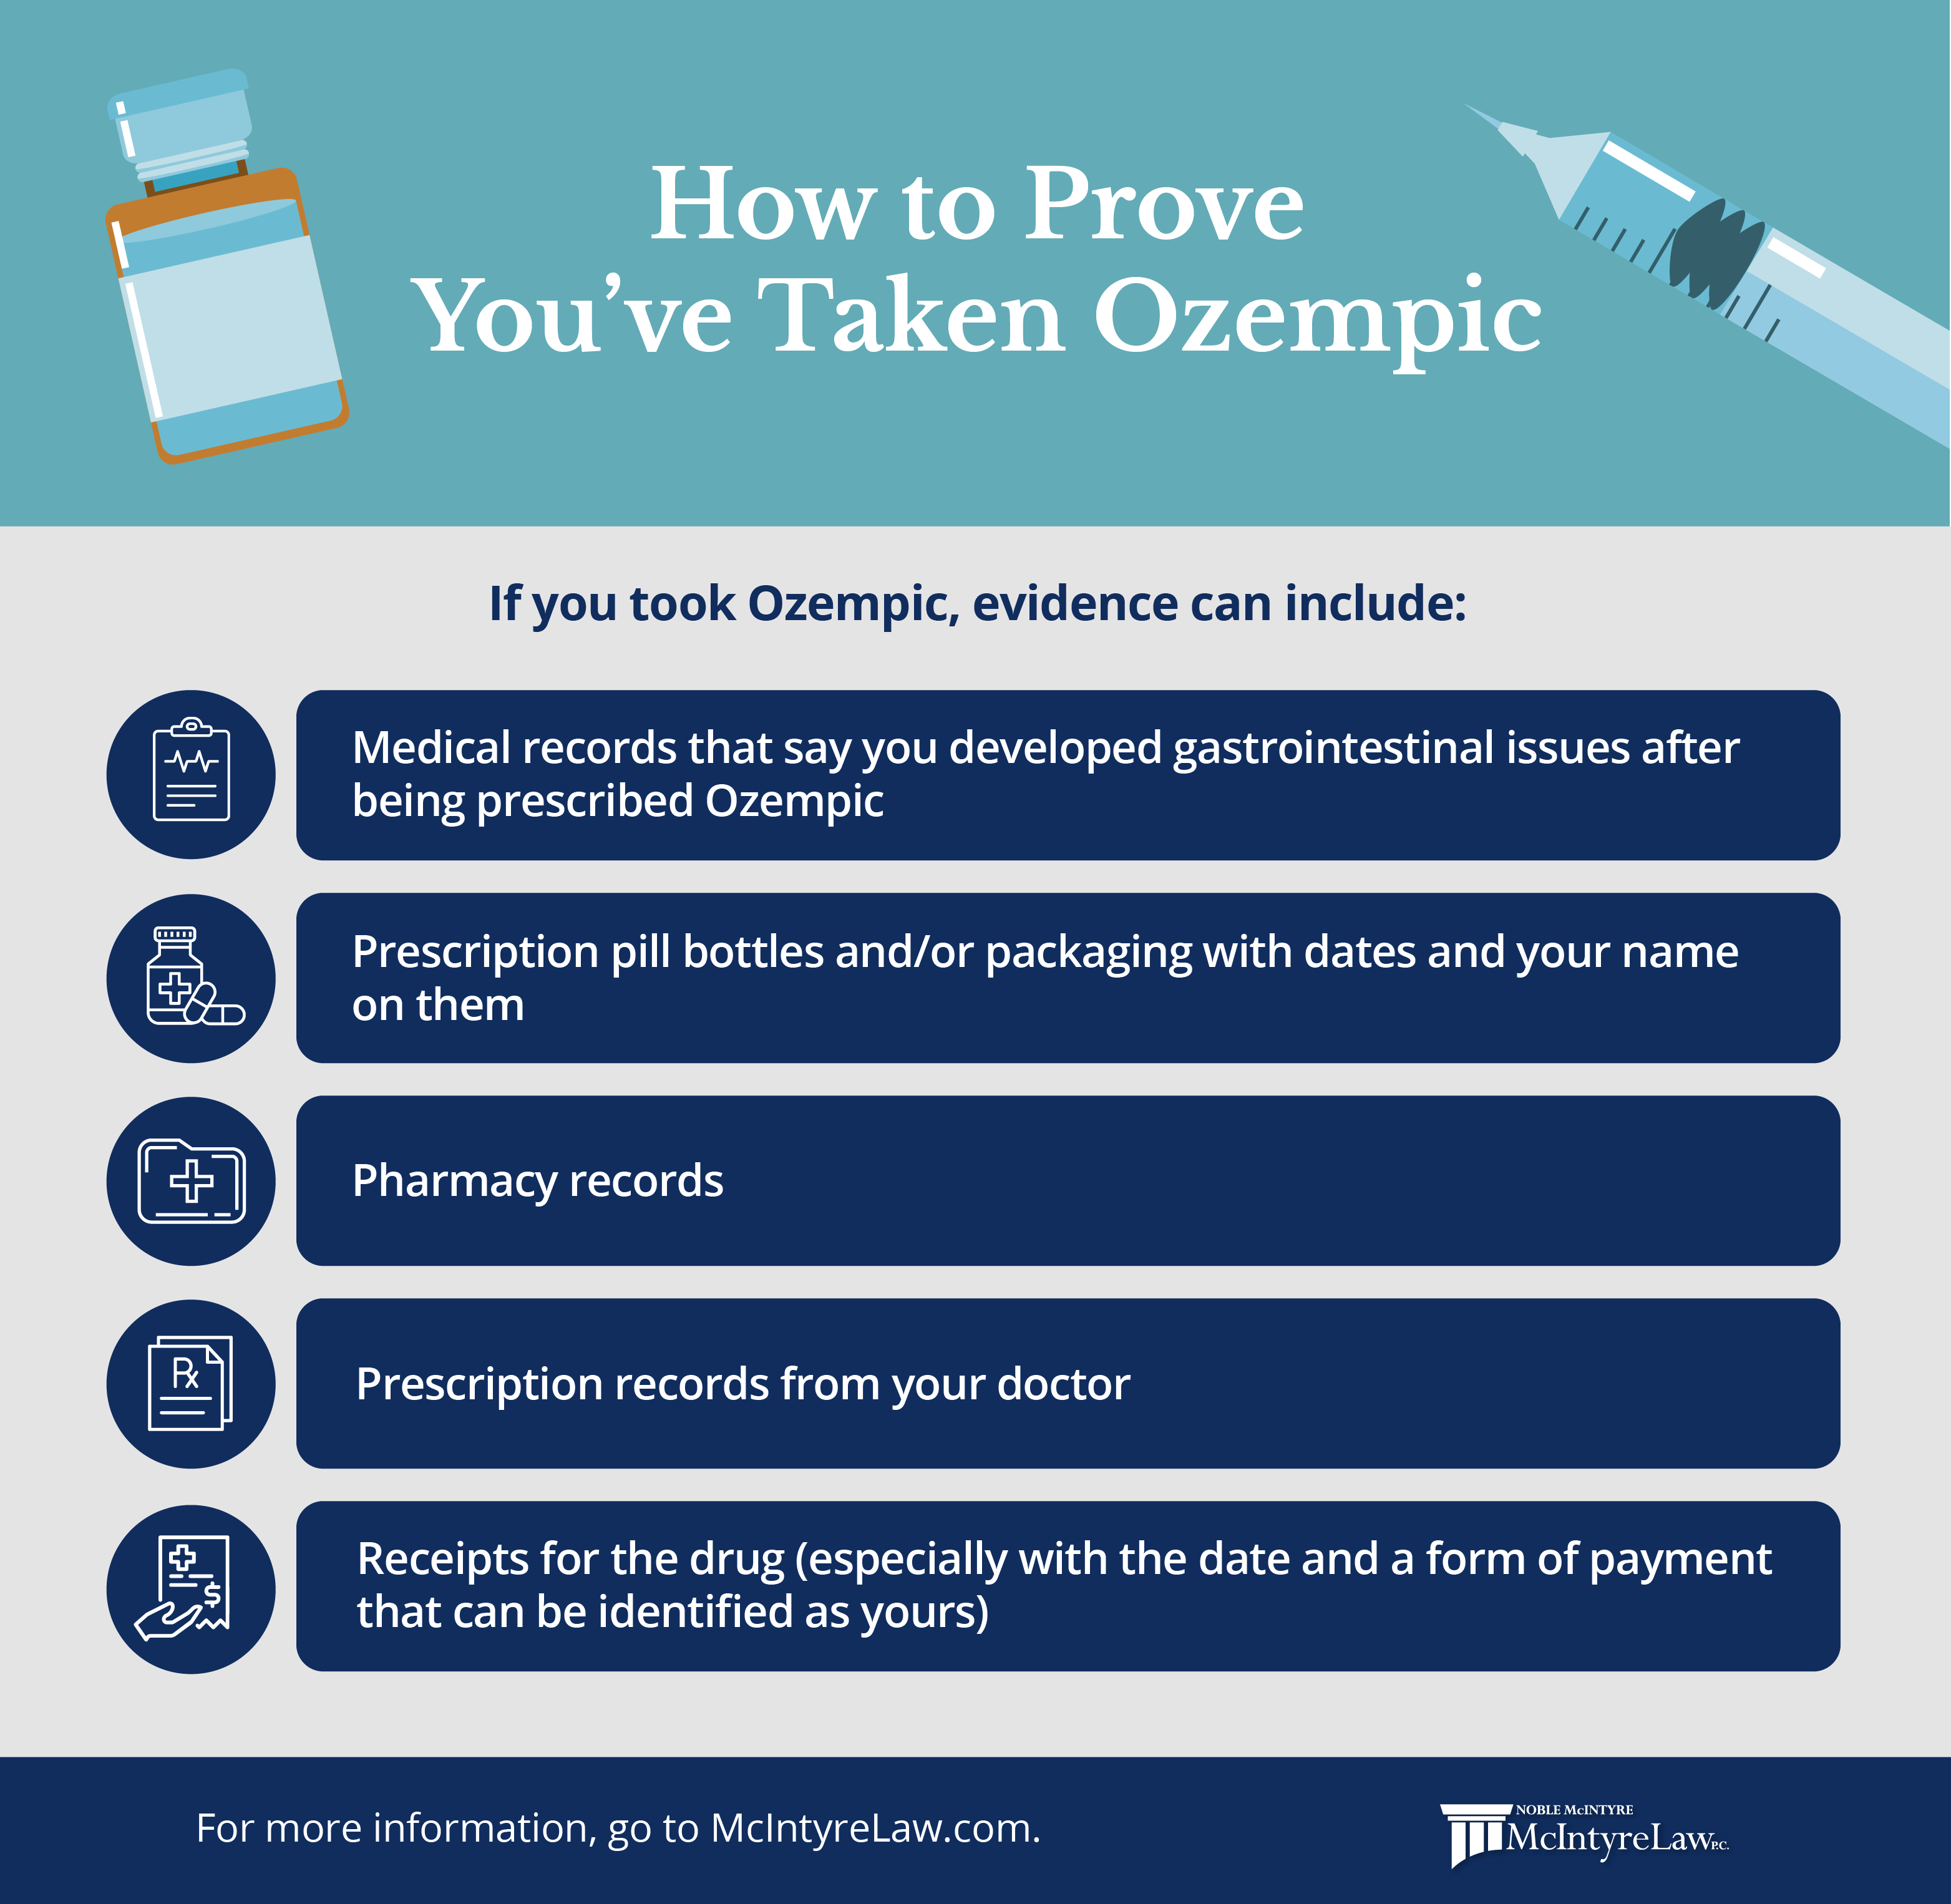 How can you prove you’ve taken Ozempic medication?